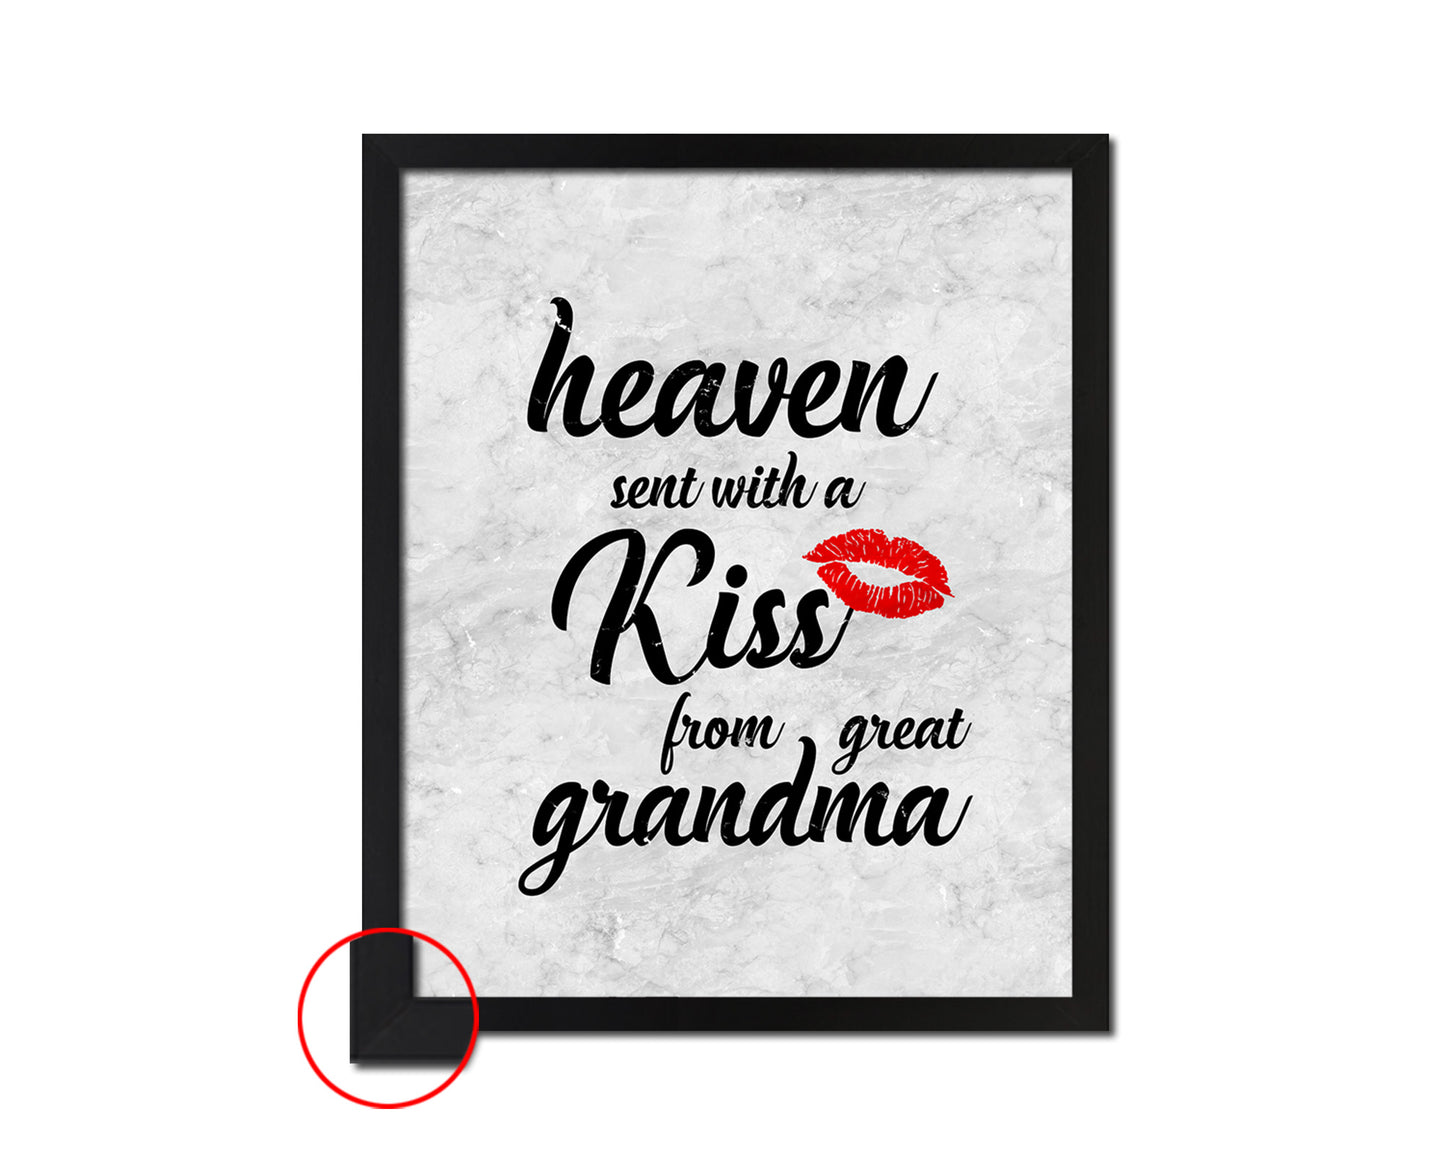 Heaven sent with a kiss from great grandma Nursery Quote Framed Print Wall Art Decor Gifts